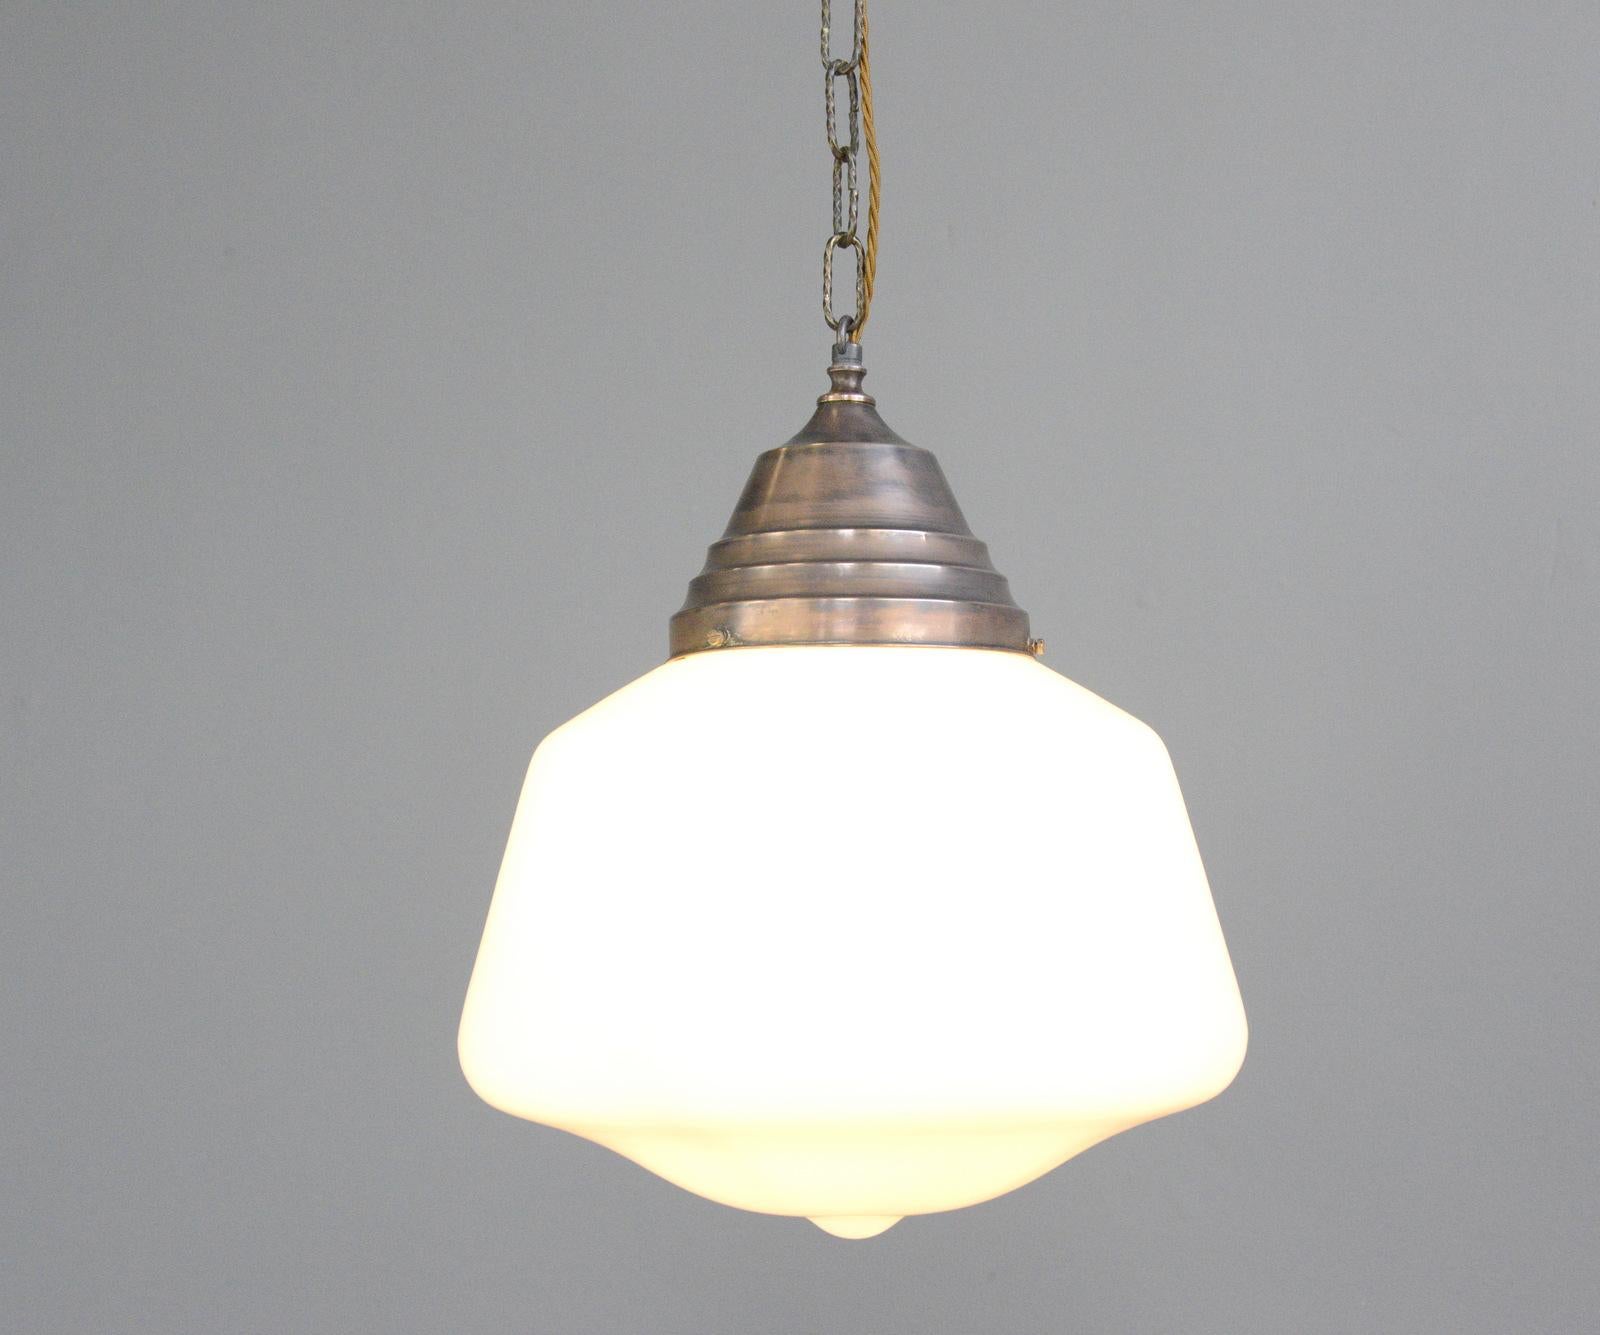 Large Art Deco opaline pendant light, circa 1930s

- Opaline glass
- Stepped copper gallery
- Takes E27 fitting bulbs
- Comes with 100cm of cable and ceiling rose
- Dutch ~ 1930s
- 35cm wide x 38cm tall

Condition Report

Fully re wired